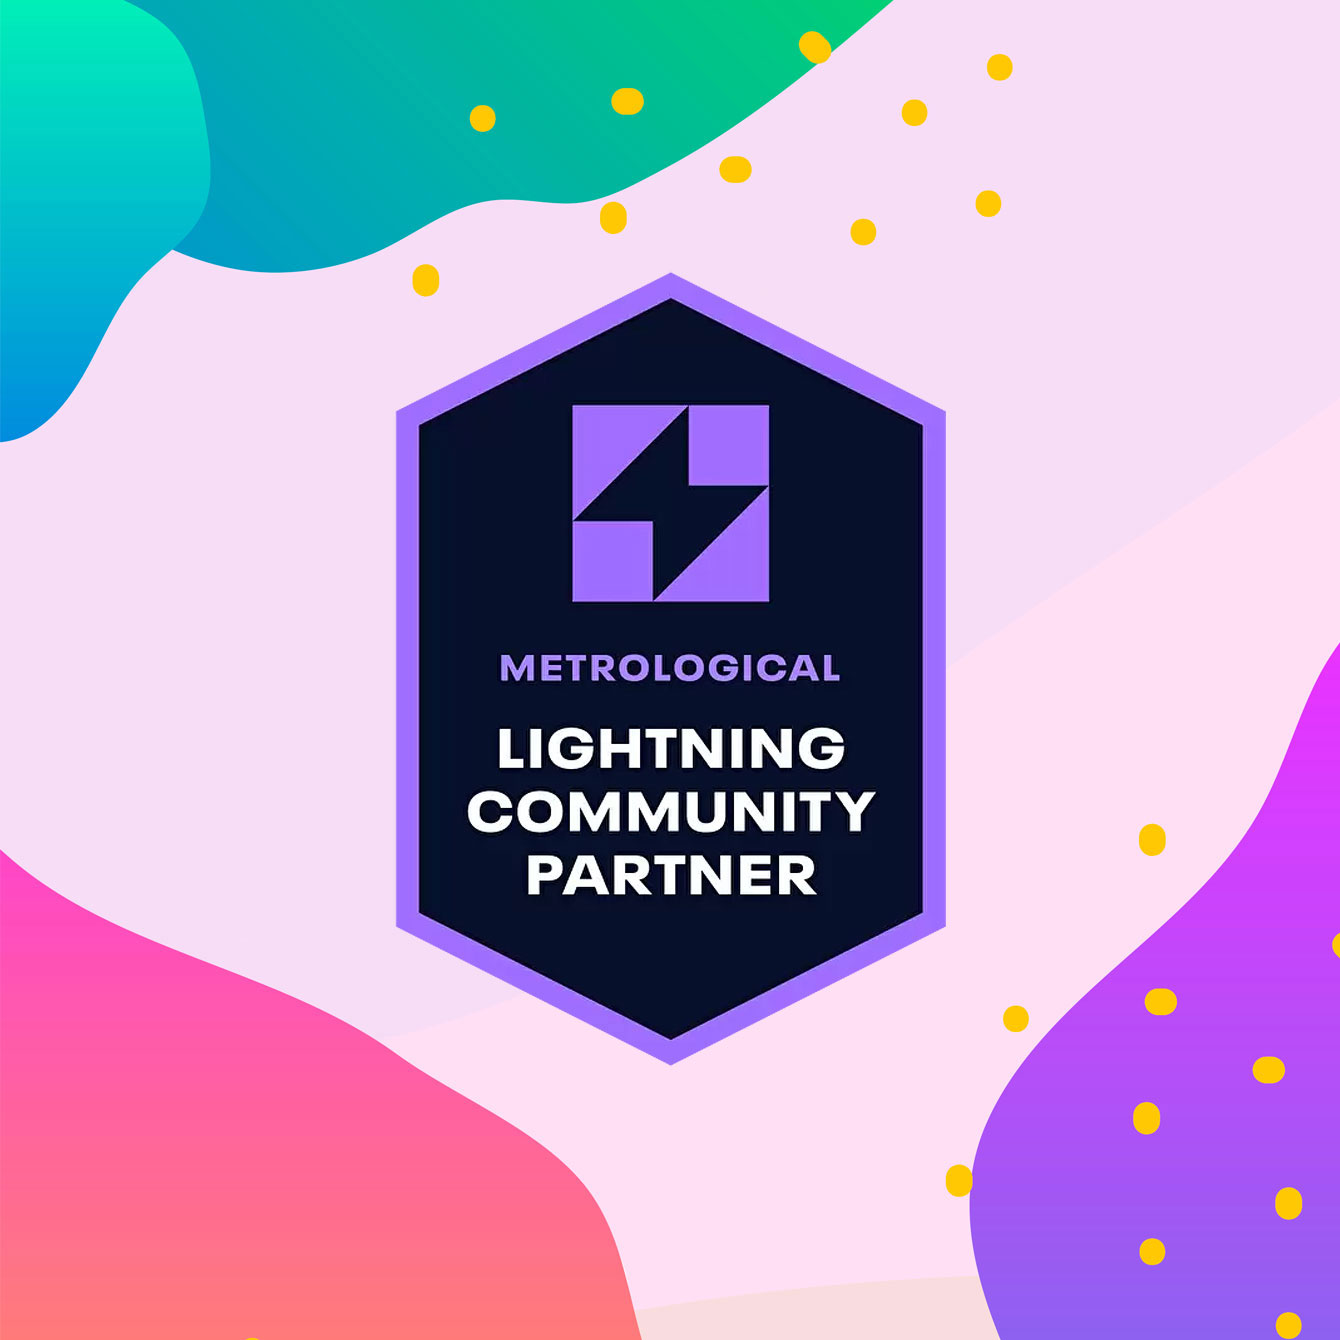 The Metrological Lightning Community Partner logo sits on top of a colorful background.